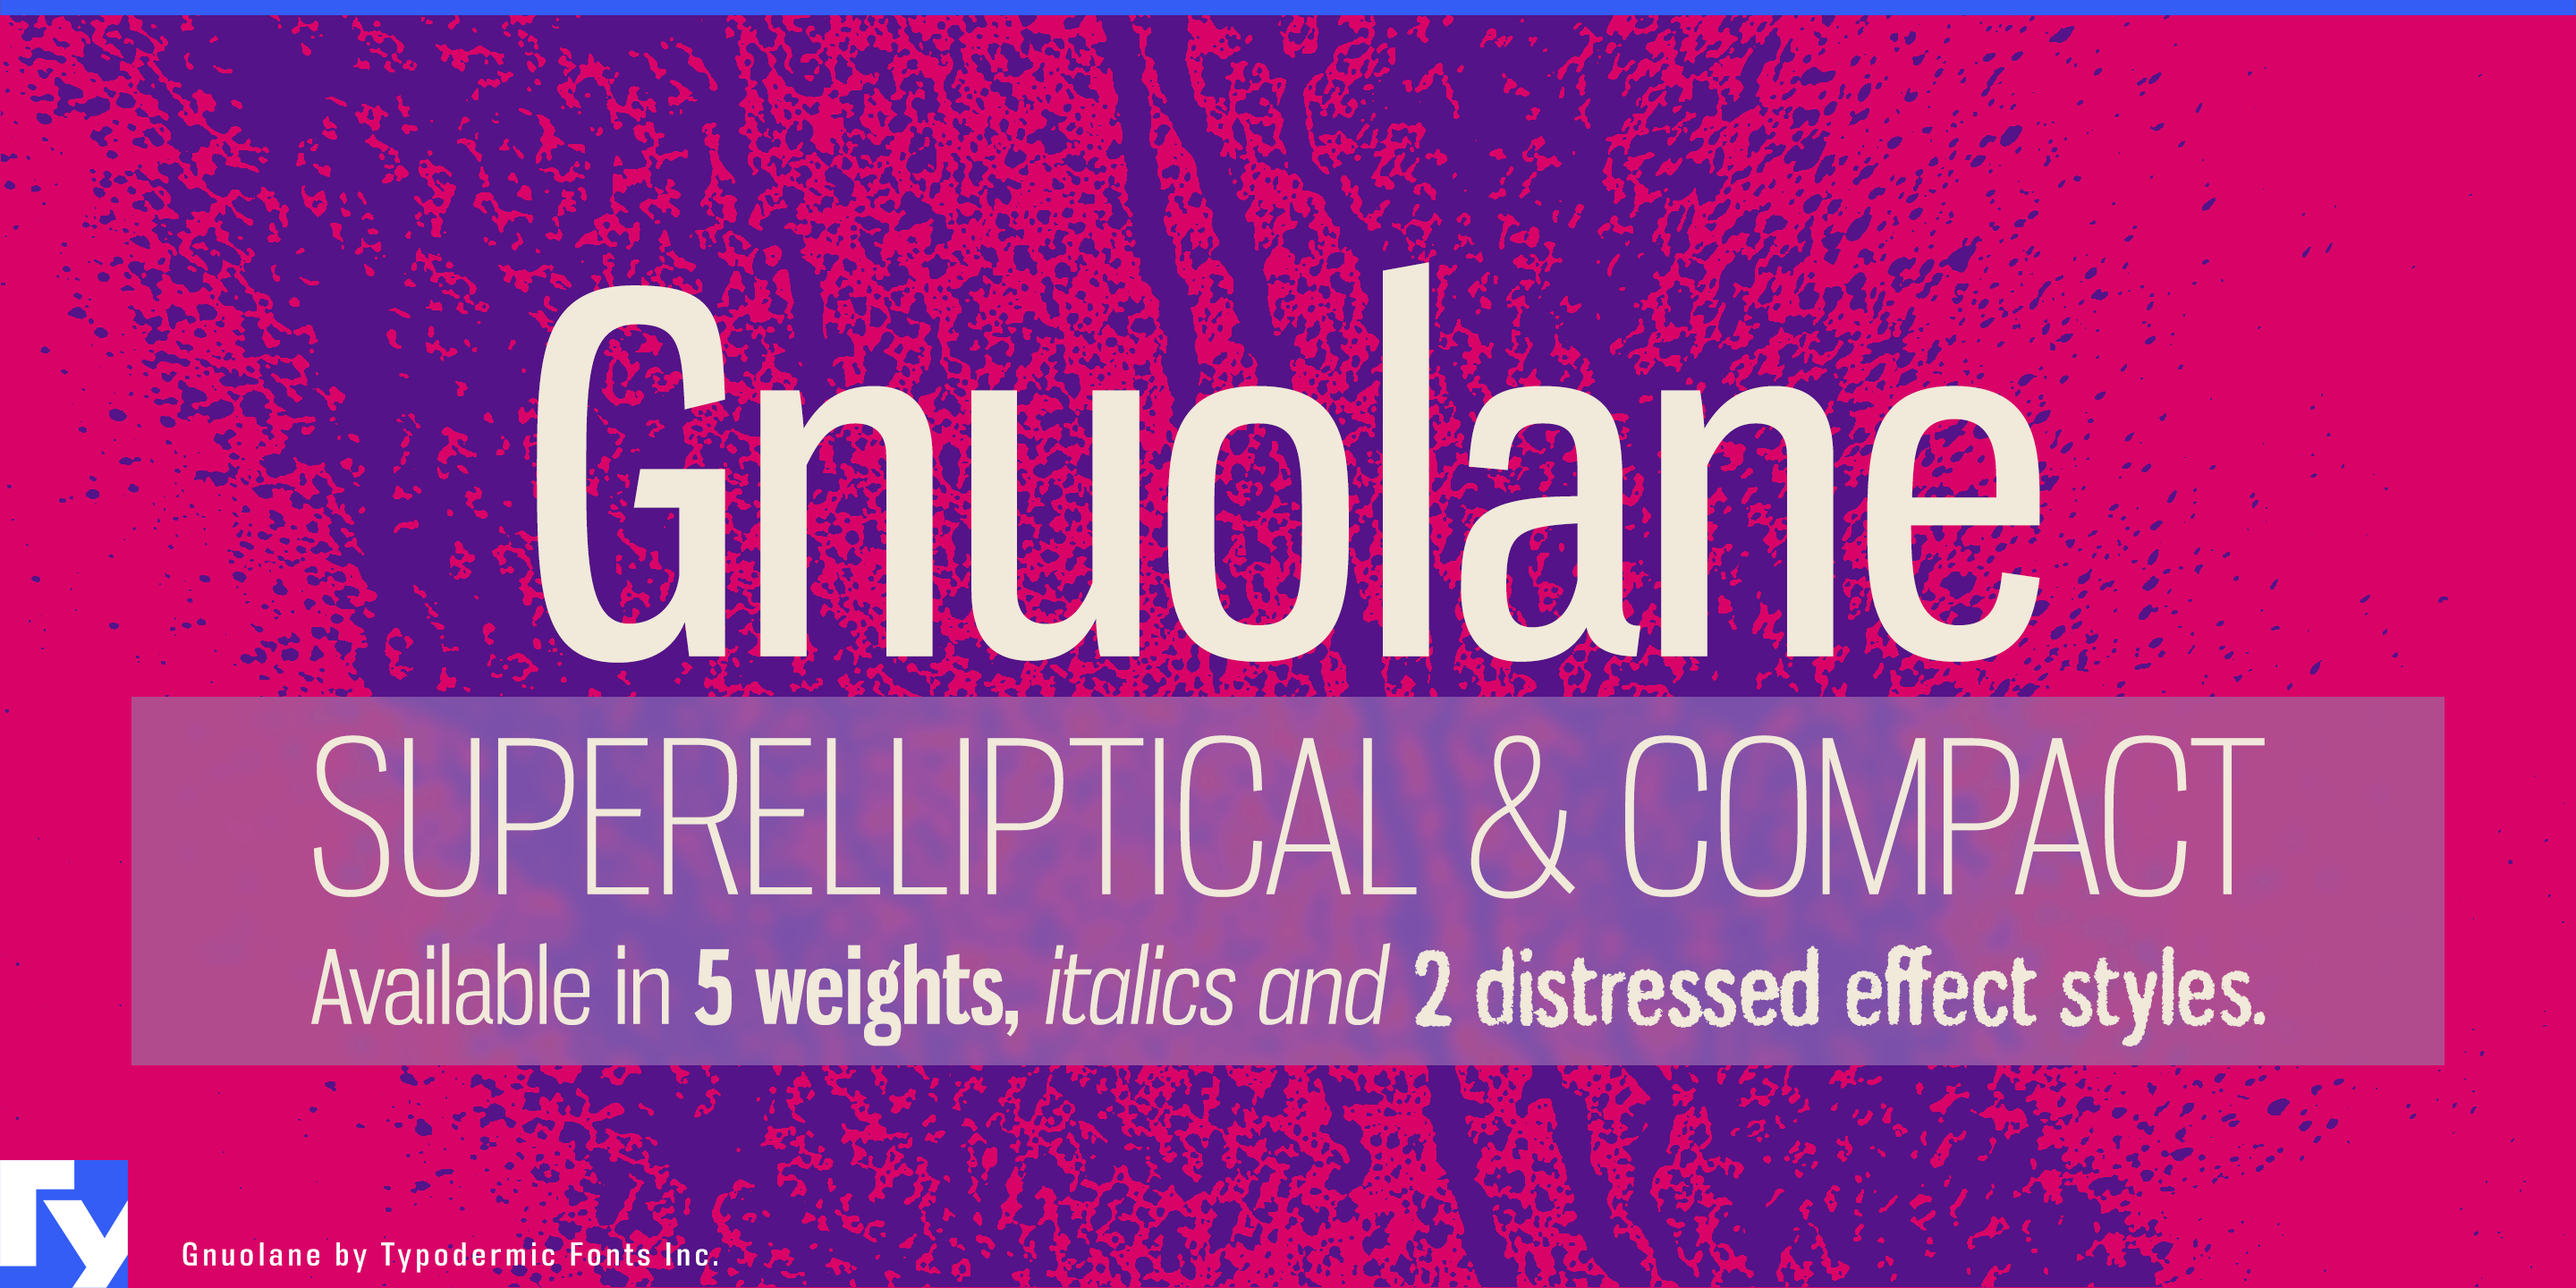 Personality-Packed: Gnuolane Typeface Speaks Volumes